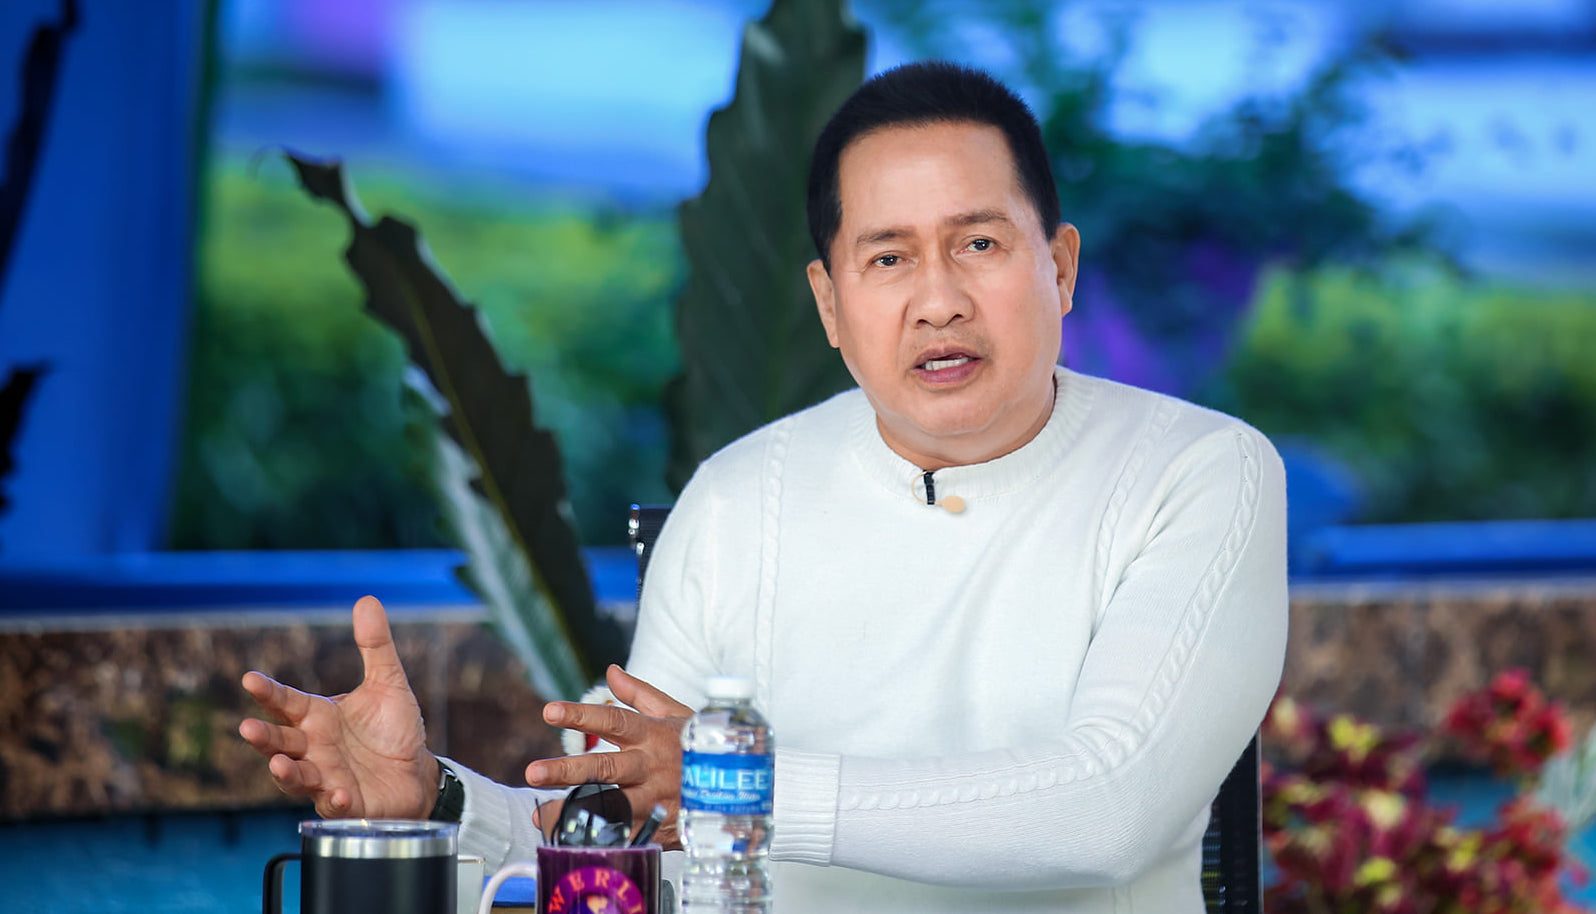 US paralegal admits role in smuggling Quiboloy’s church workers – US justice department